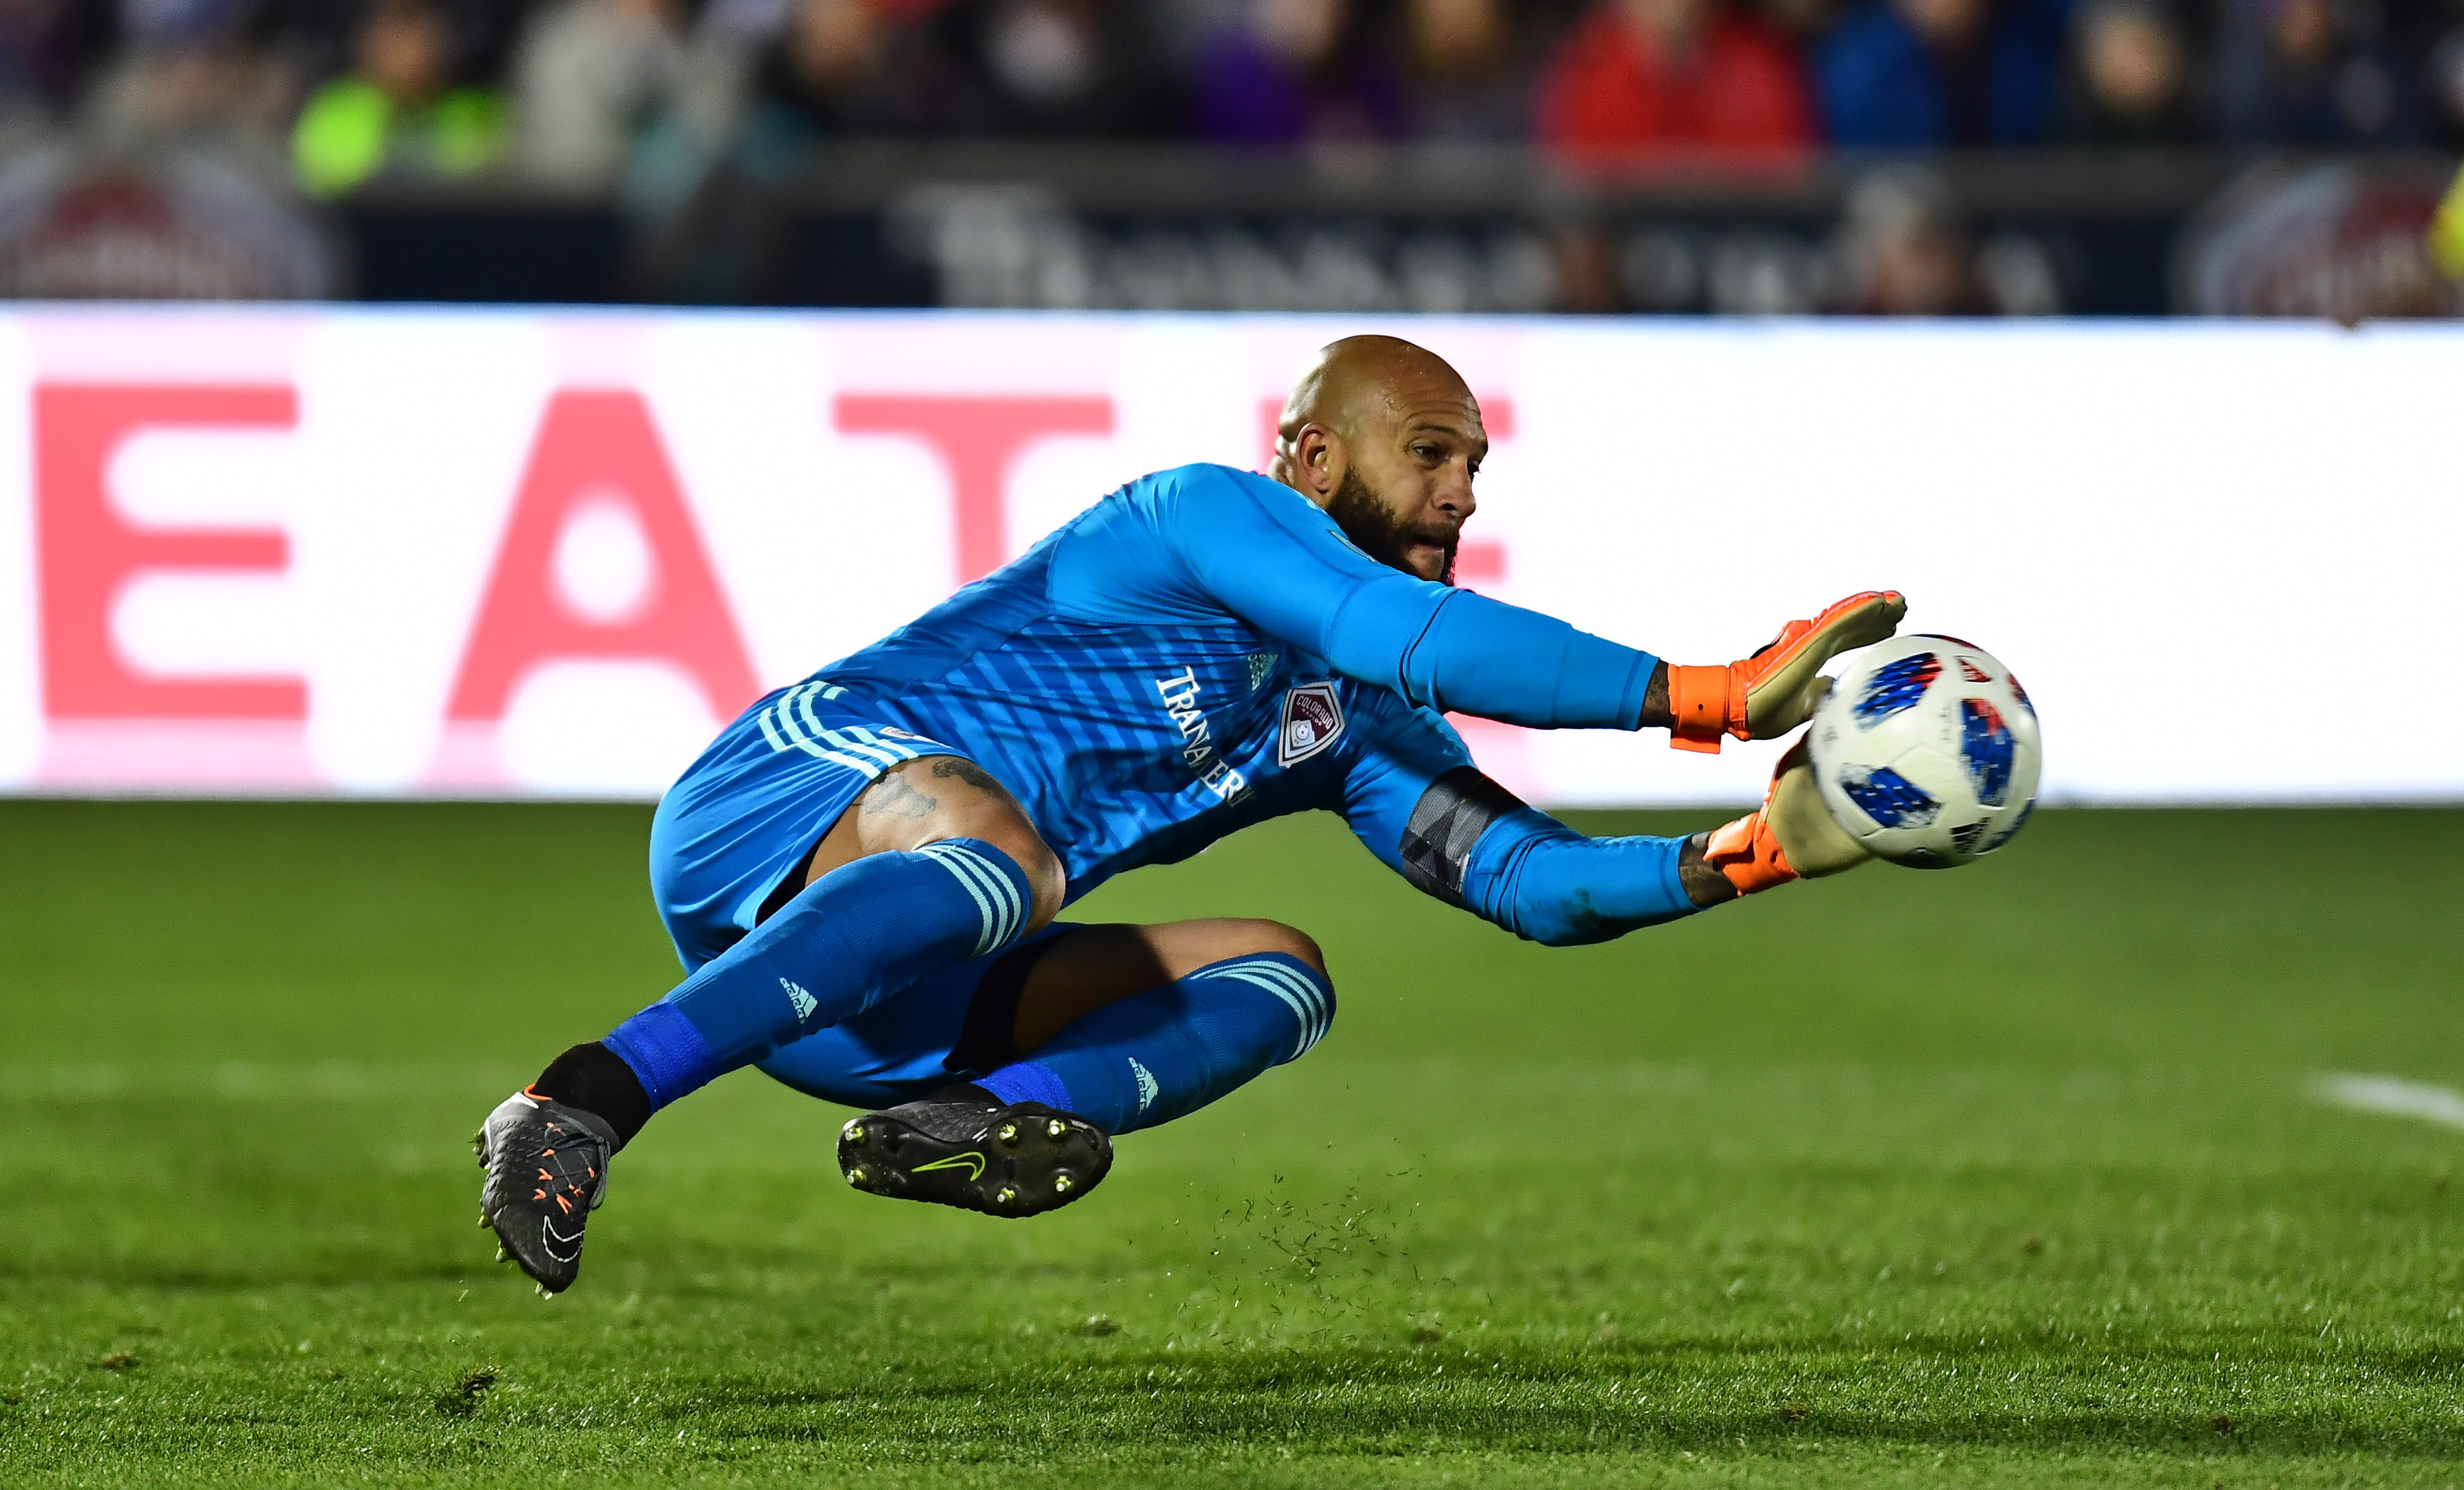 After 21 seasons, Tim Howard is still producing world-class performances